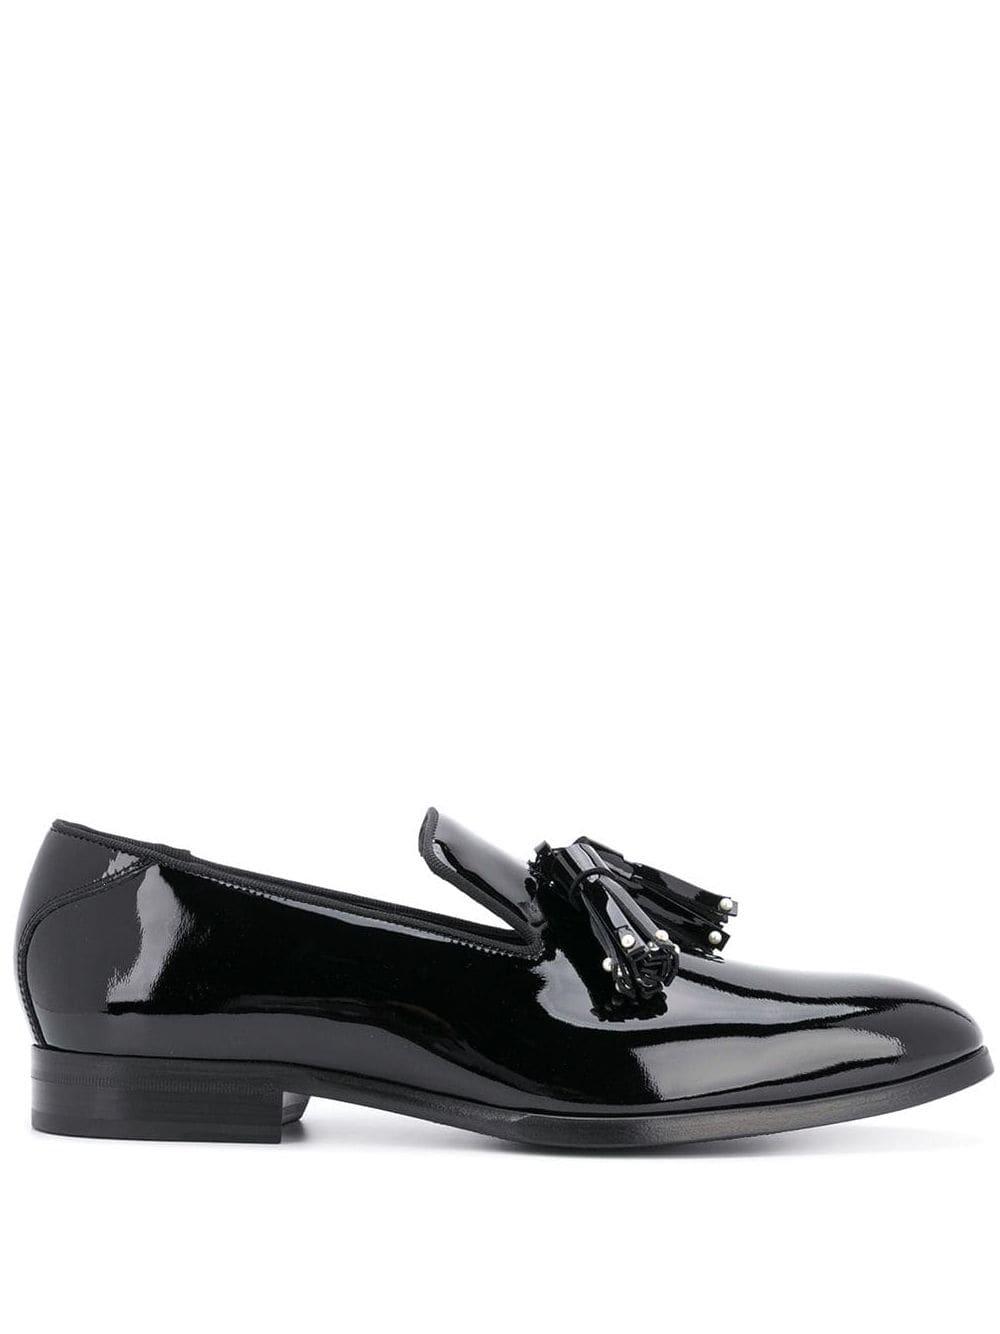 Jimmy Choo Leather Foxley Loafers in Black for Men - Lyst